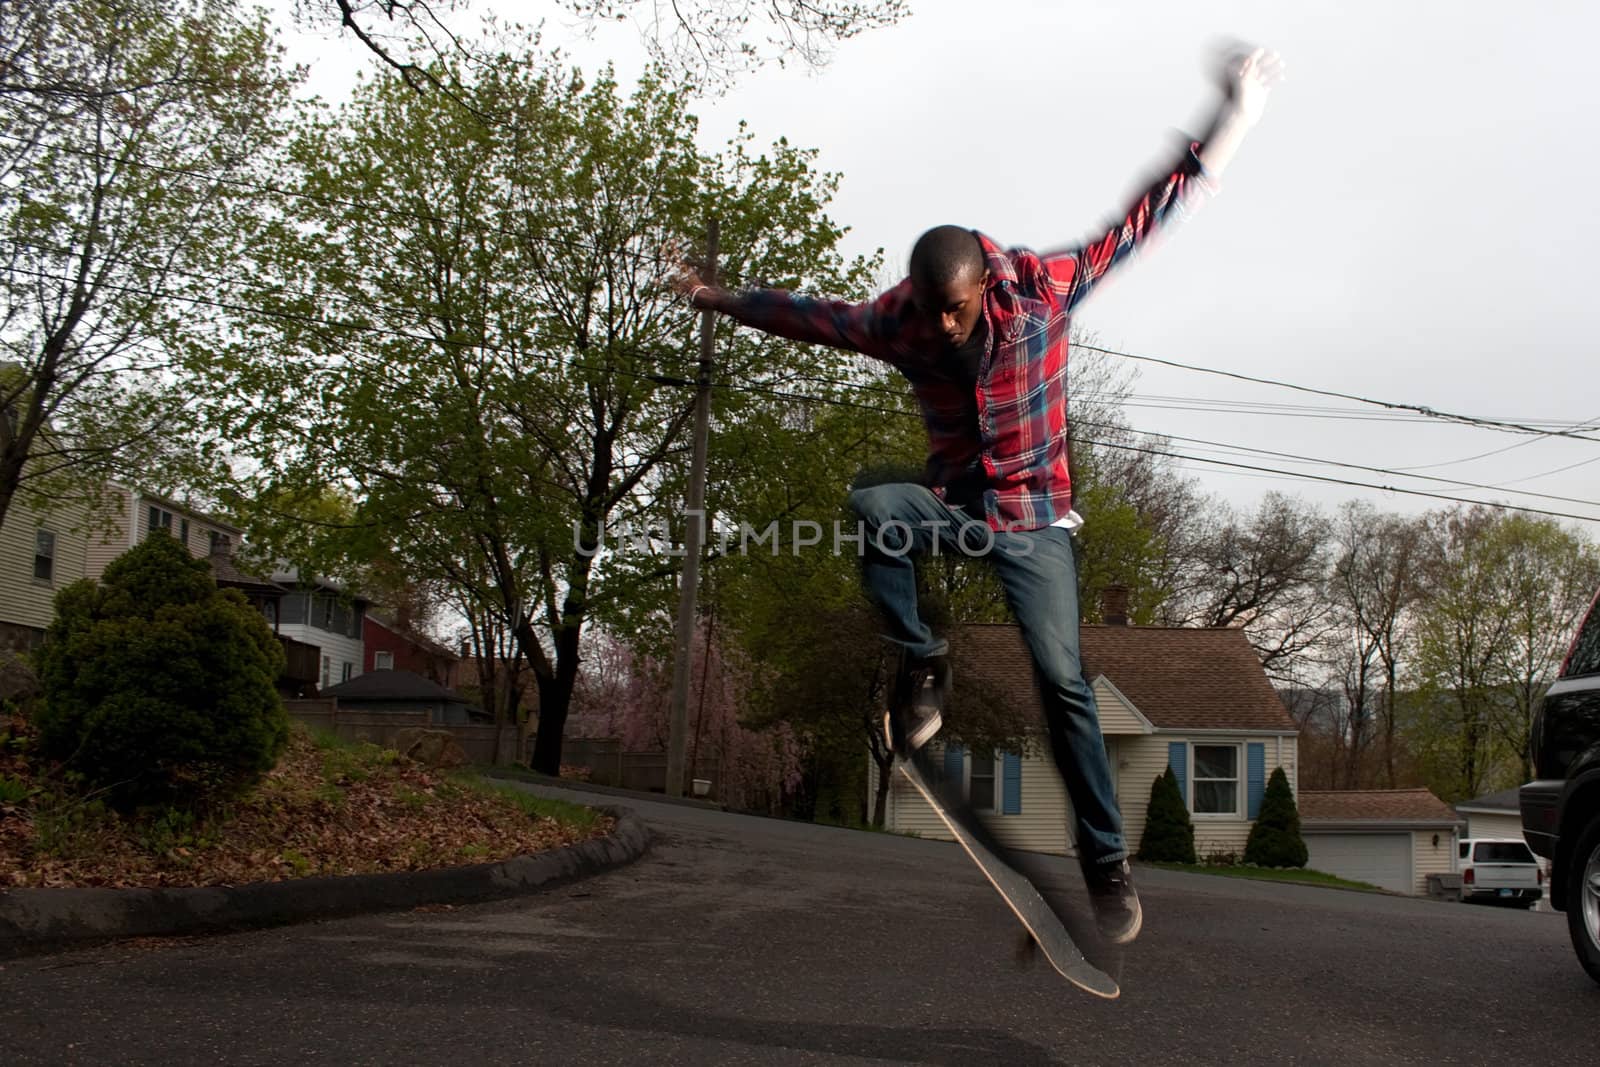 A skateboarder performs jumps or ollies on asphalt.  Slight motion blur showing the movement on the arms and legs.